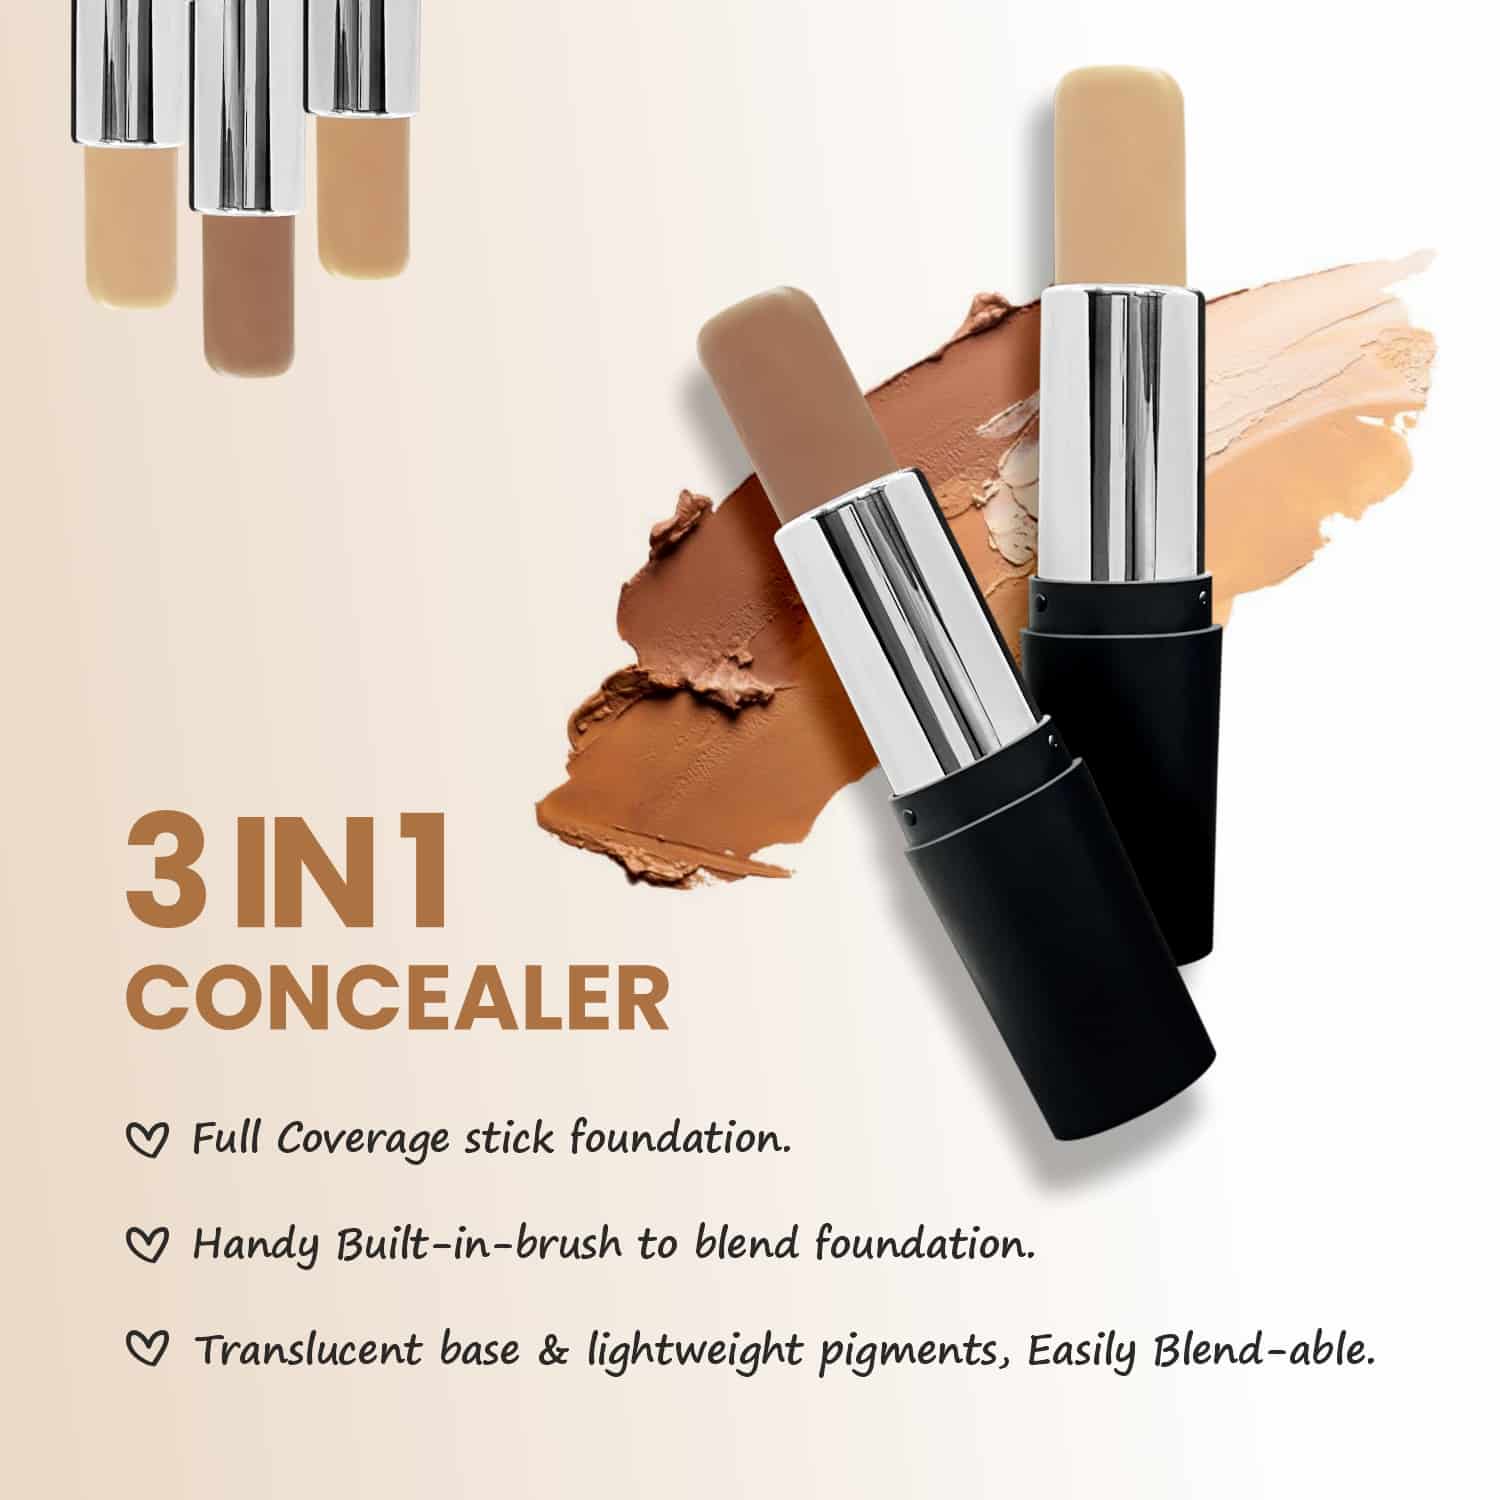 3 in 1 Concealer - 01 Classic Ivory